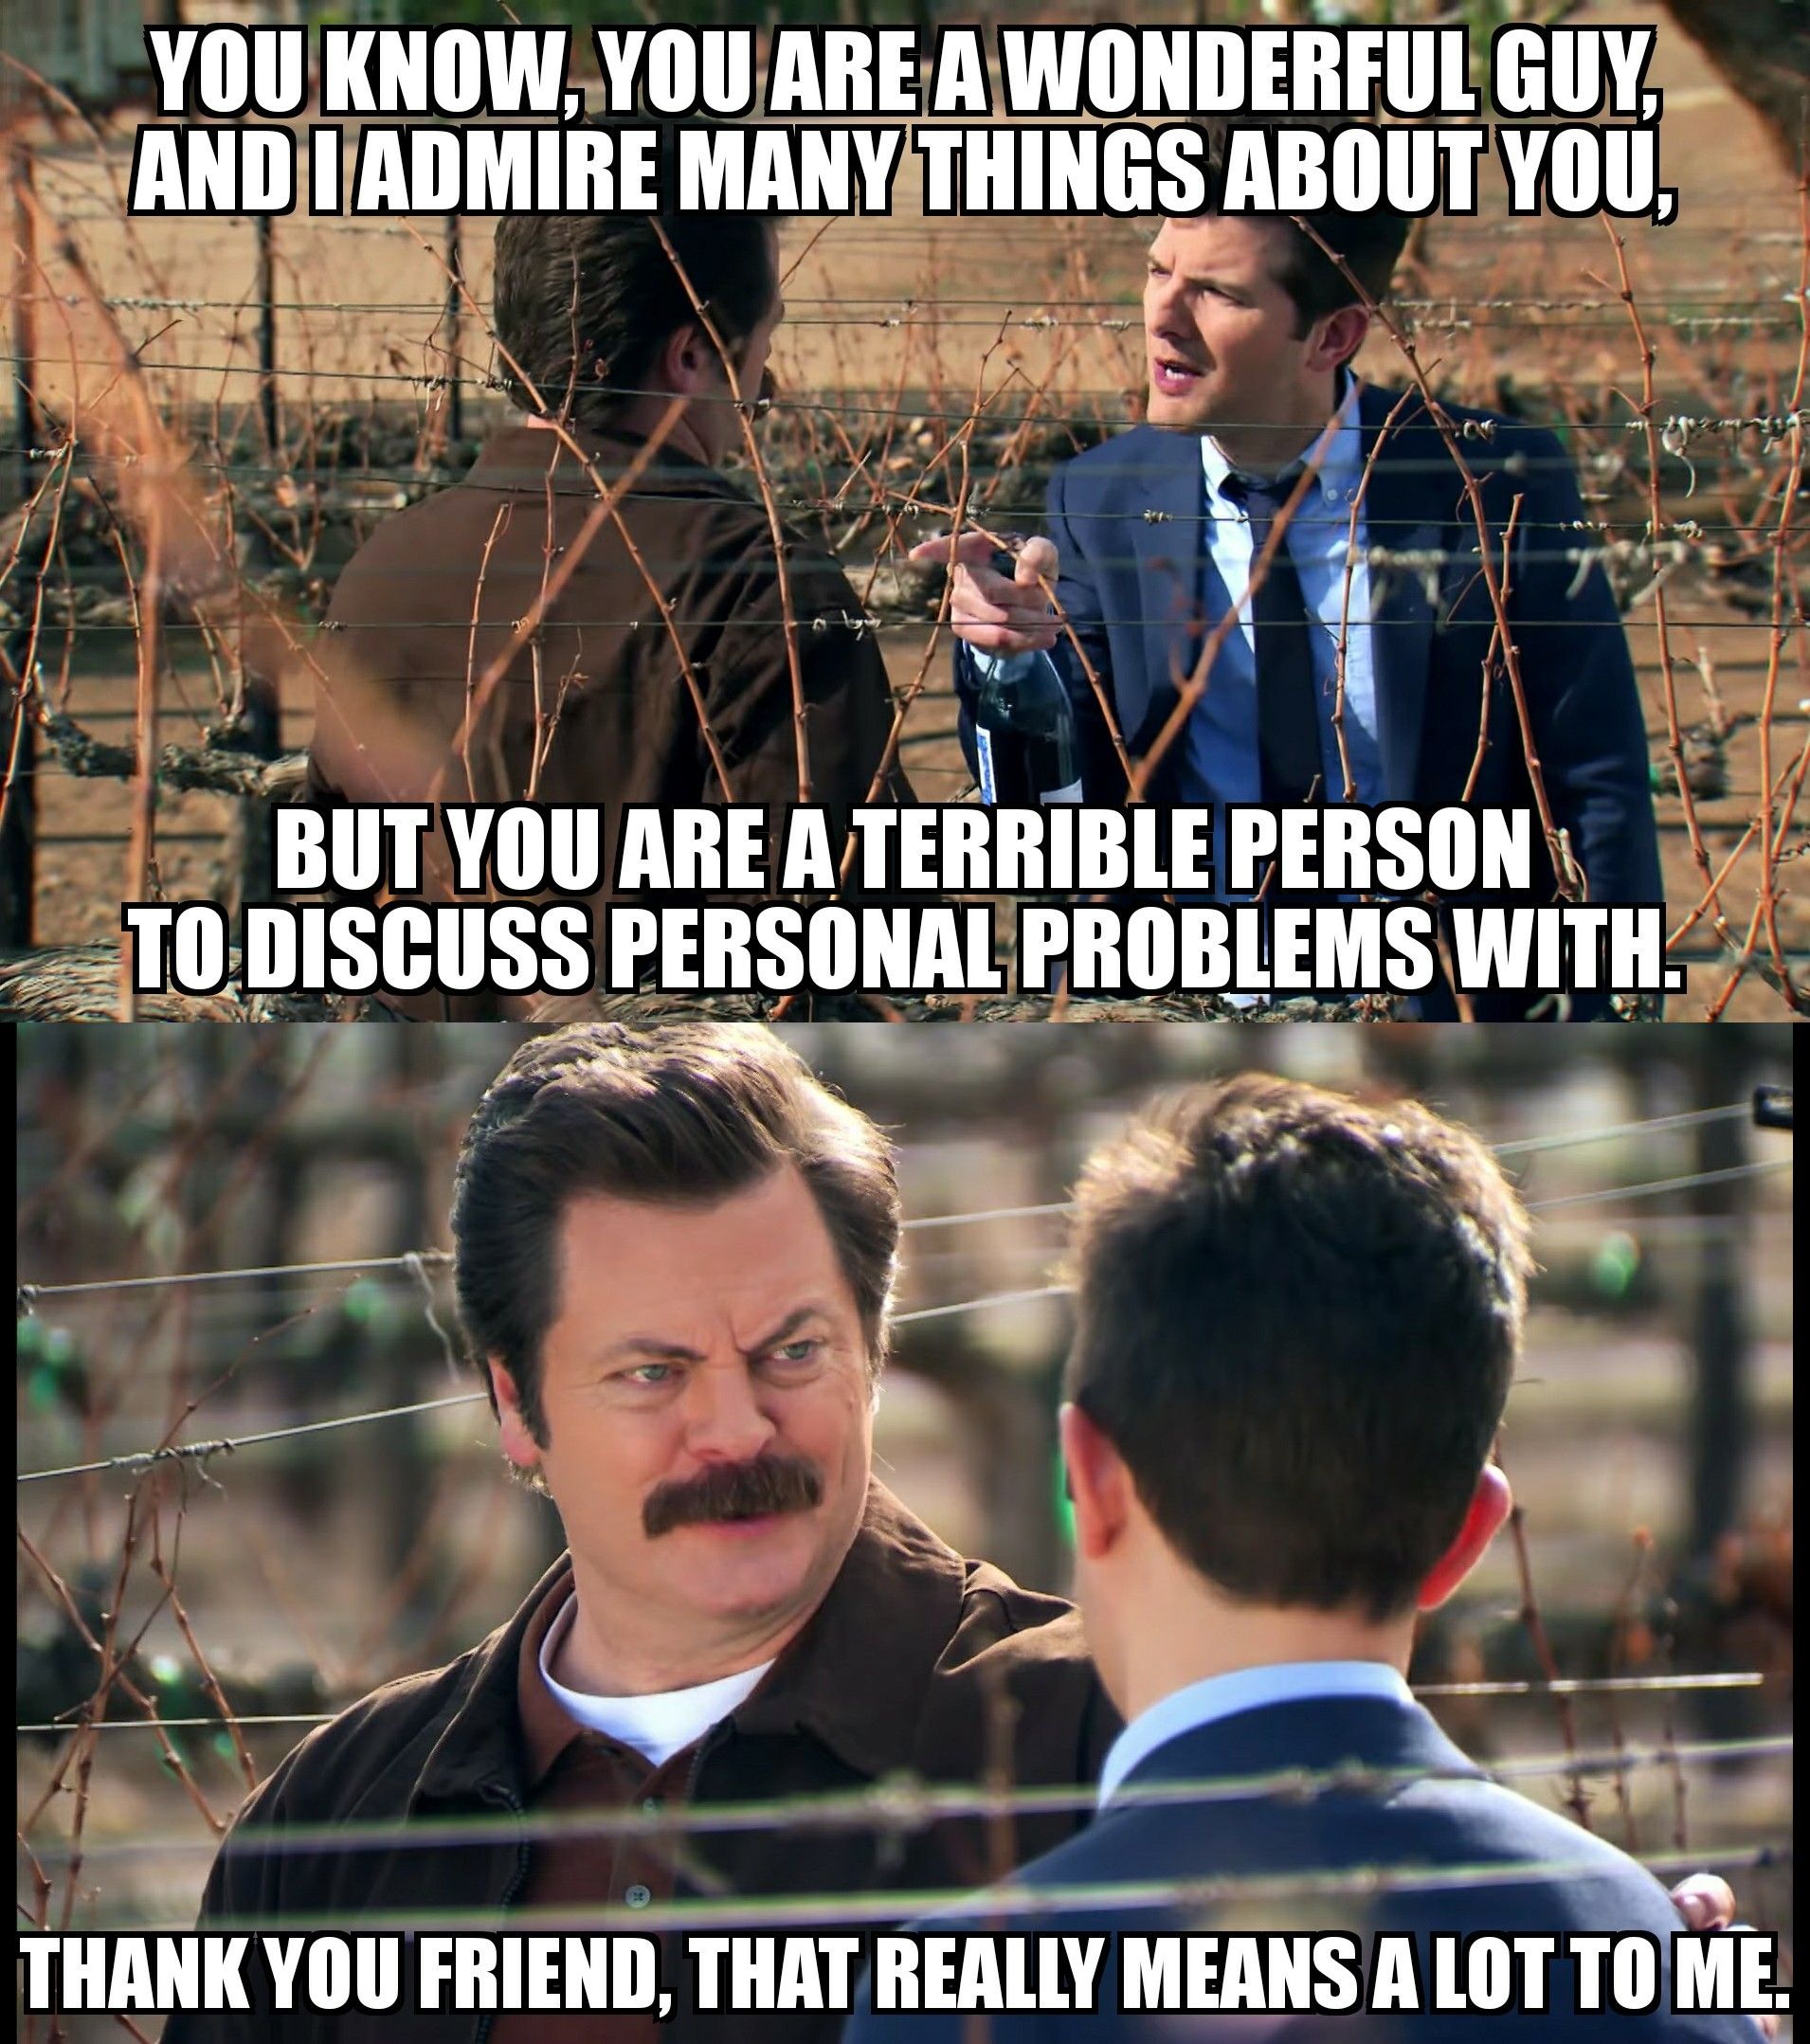 Ron Swanson. The person we all strive to be.